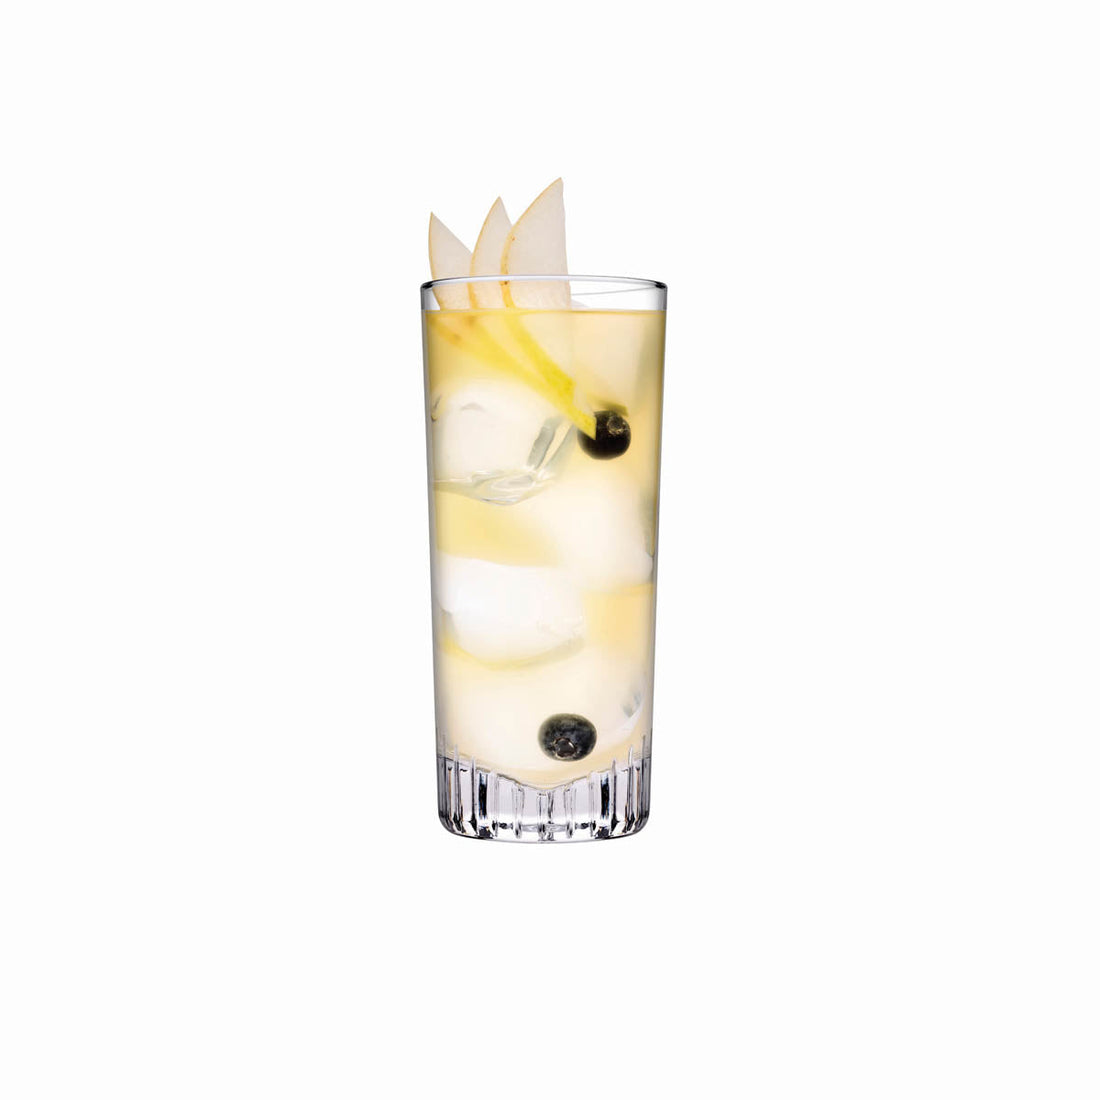 NUDE Caldera highball glass, with a v-shaped heavy bottom, presented with a soft yellow cocktail mix on a white background